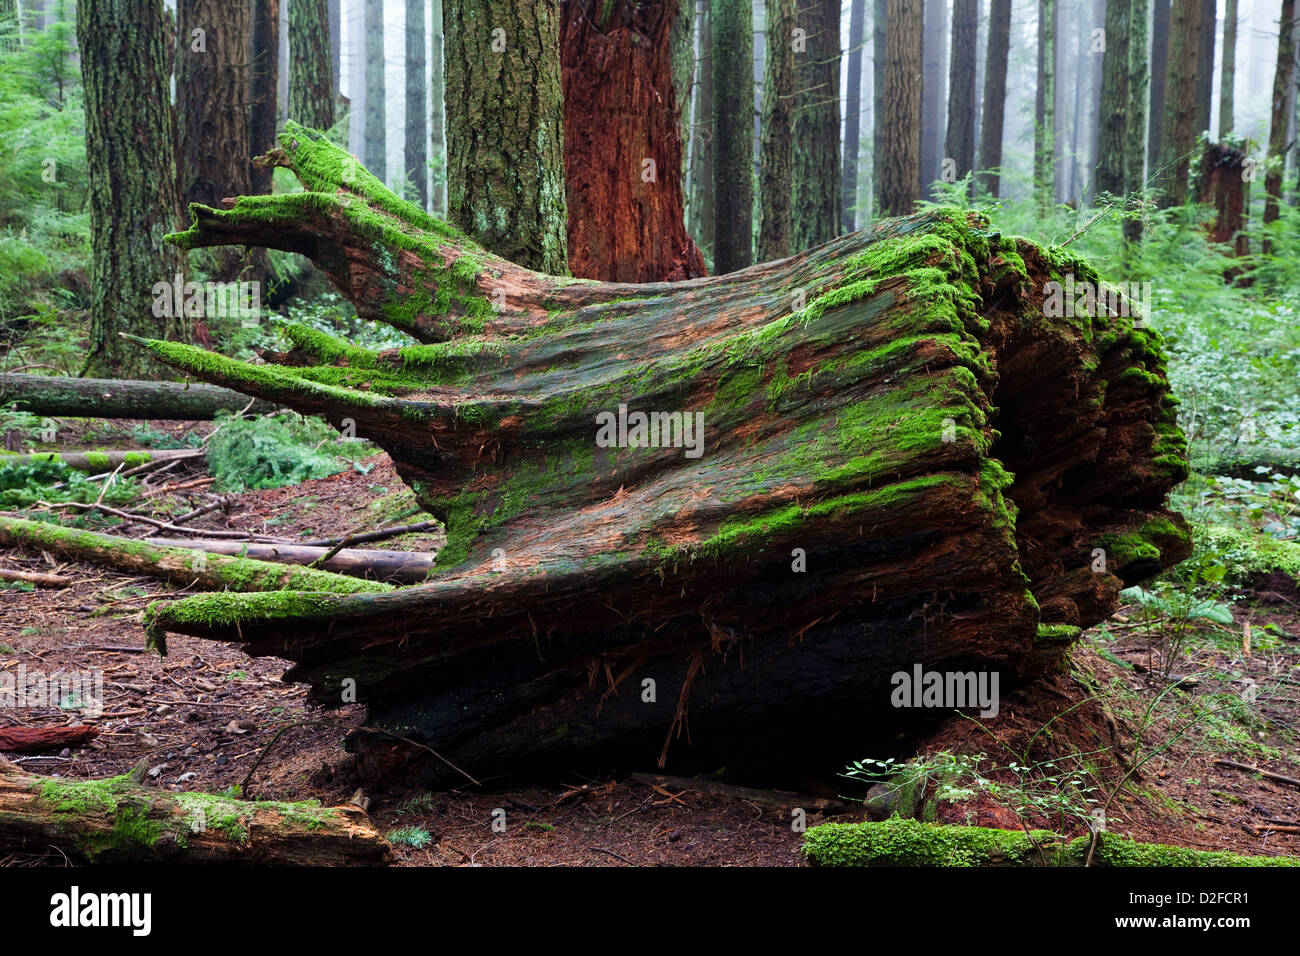 A collapsed rotting stump in a temperate rain forest Stock Photo